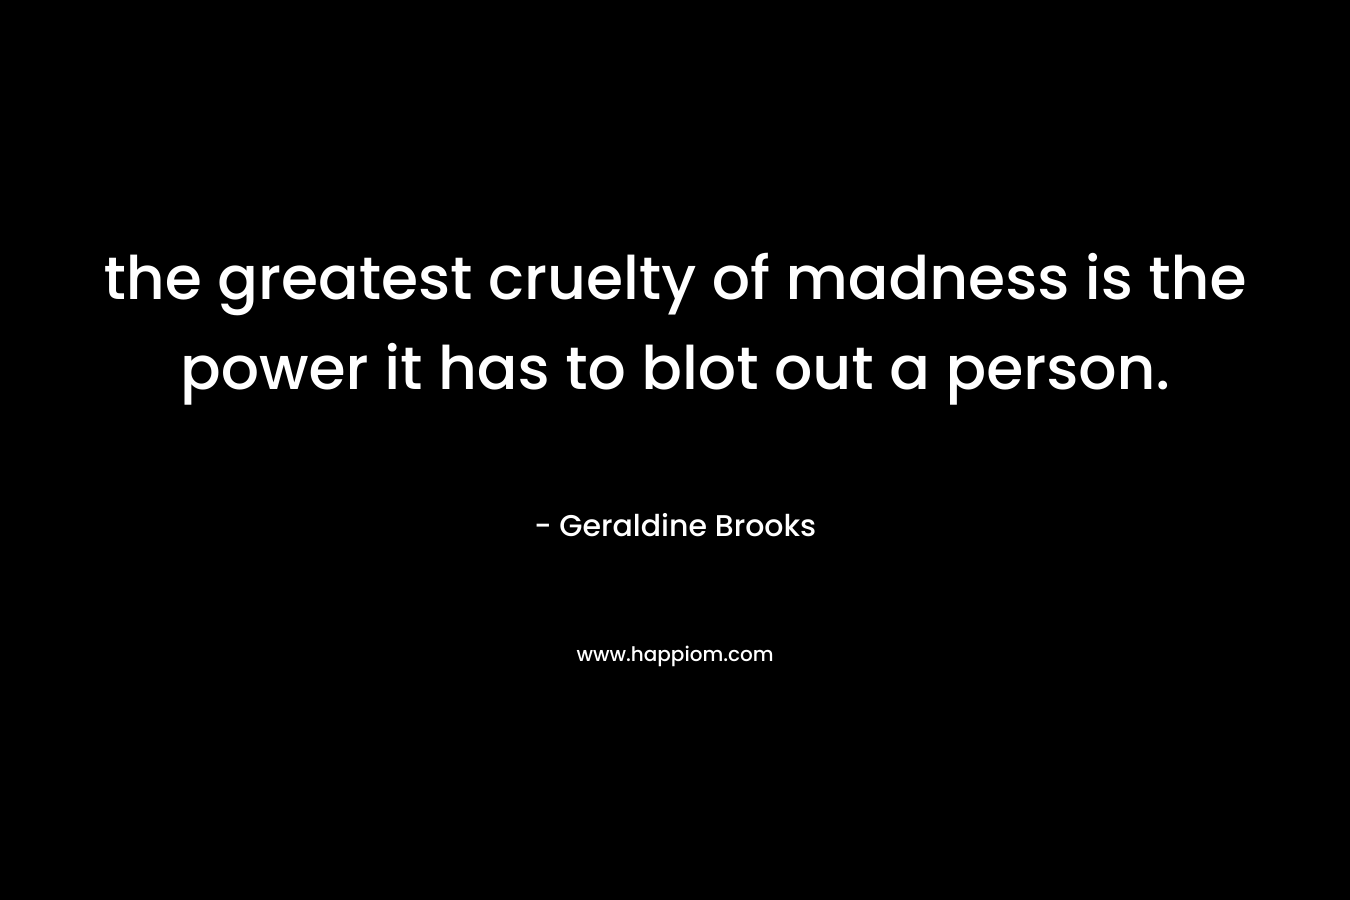 the greatest cruelty of madness is the power it has to blot out a person.